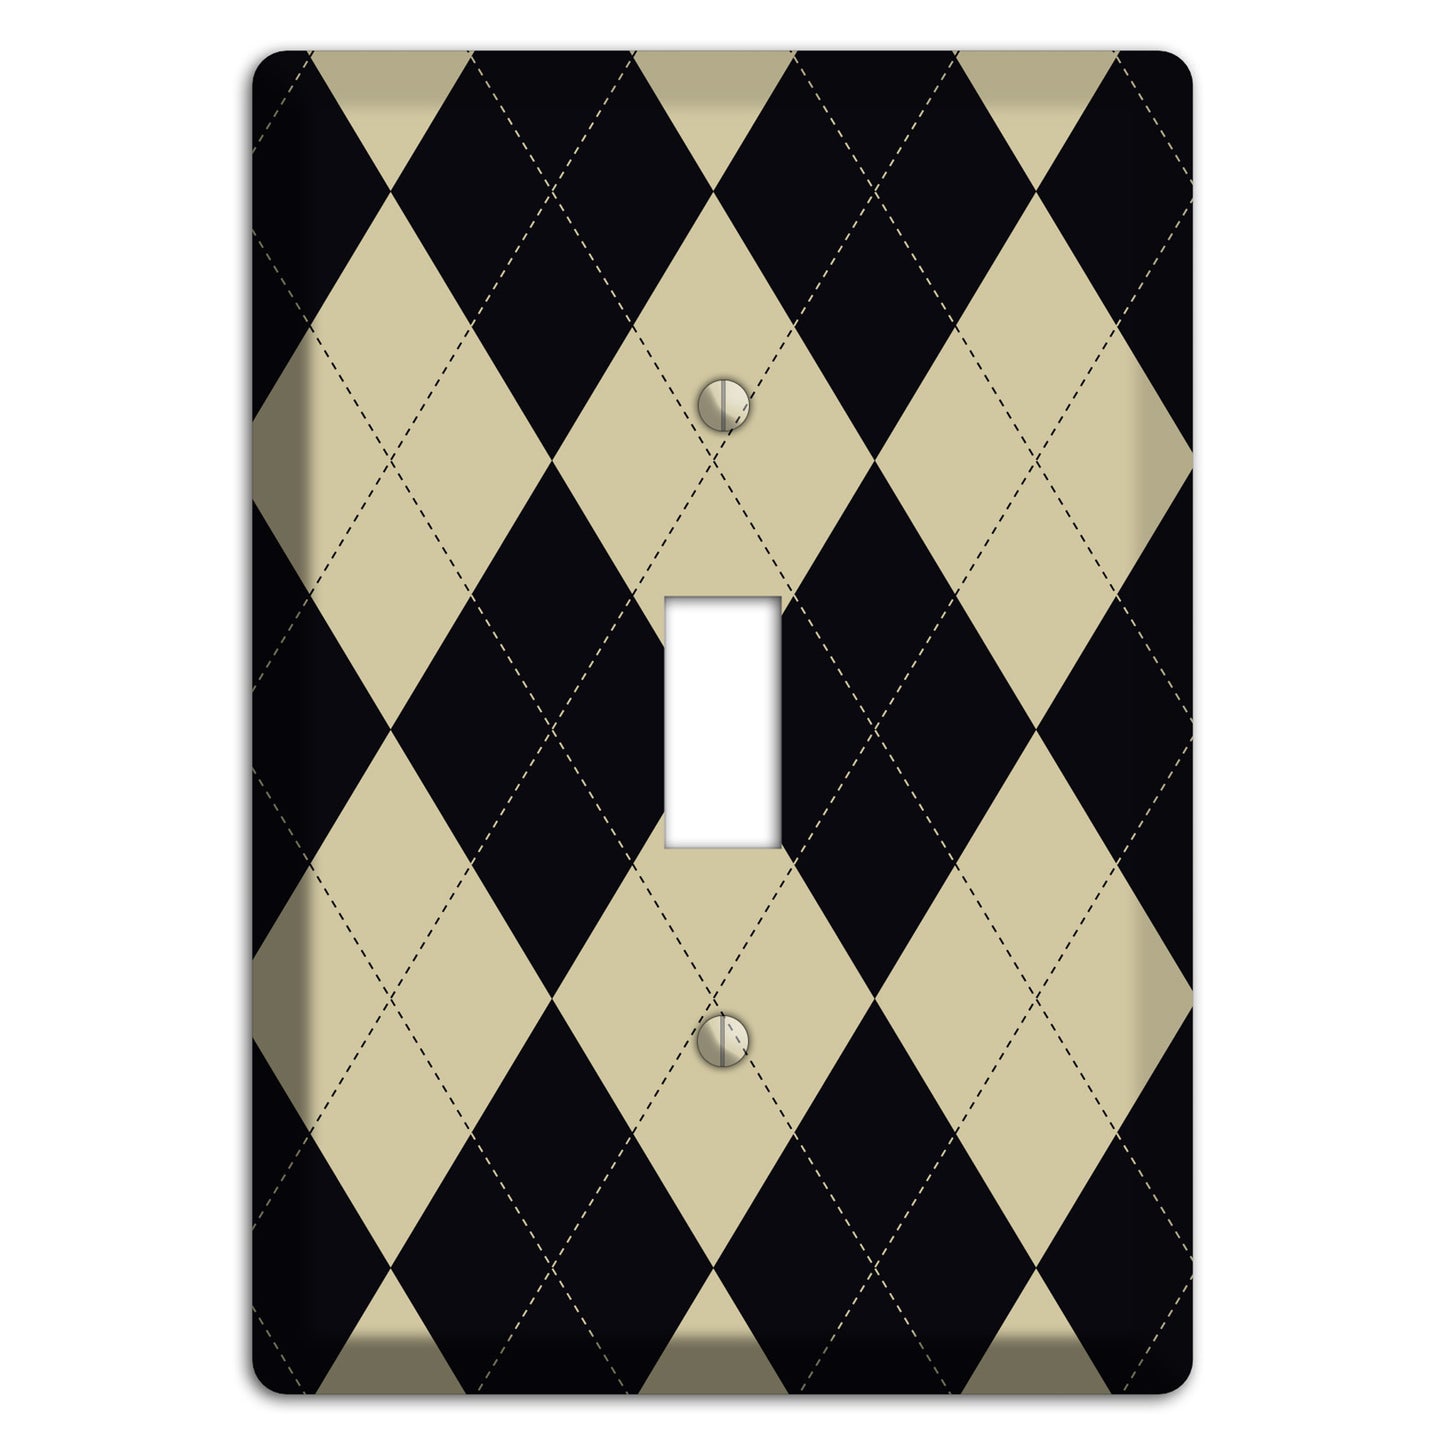 Tan and Black Argyle Cover Plates